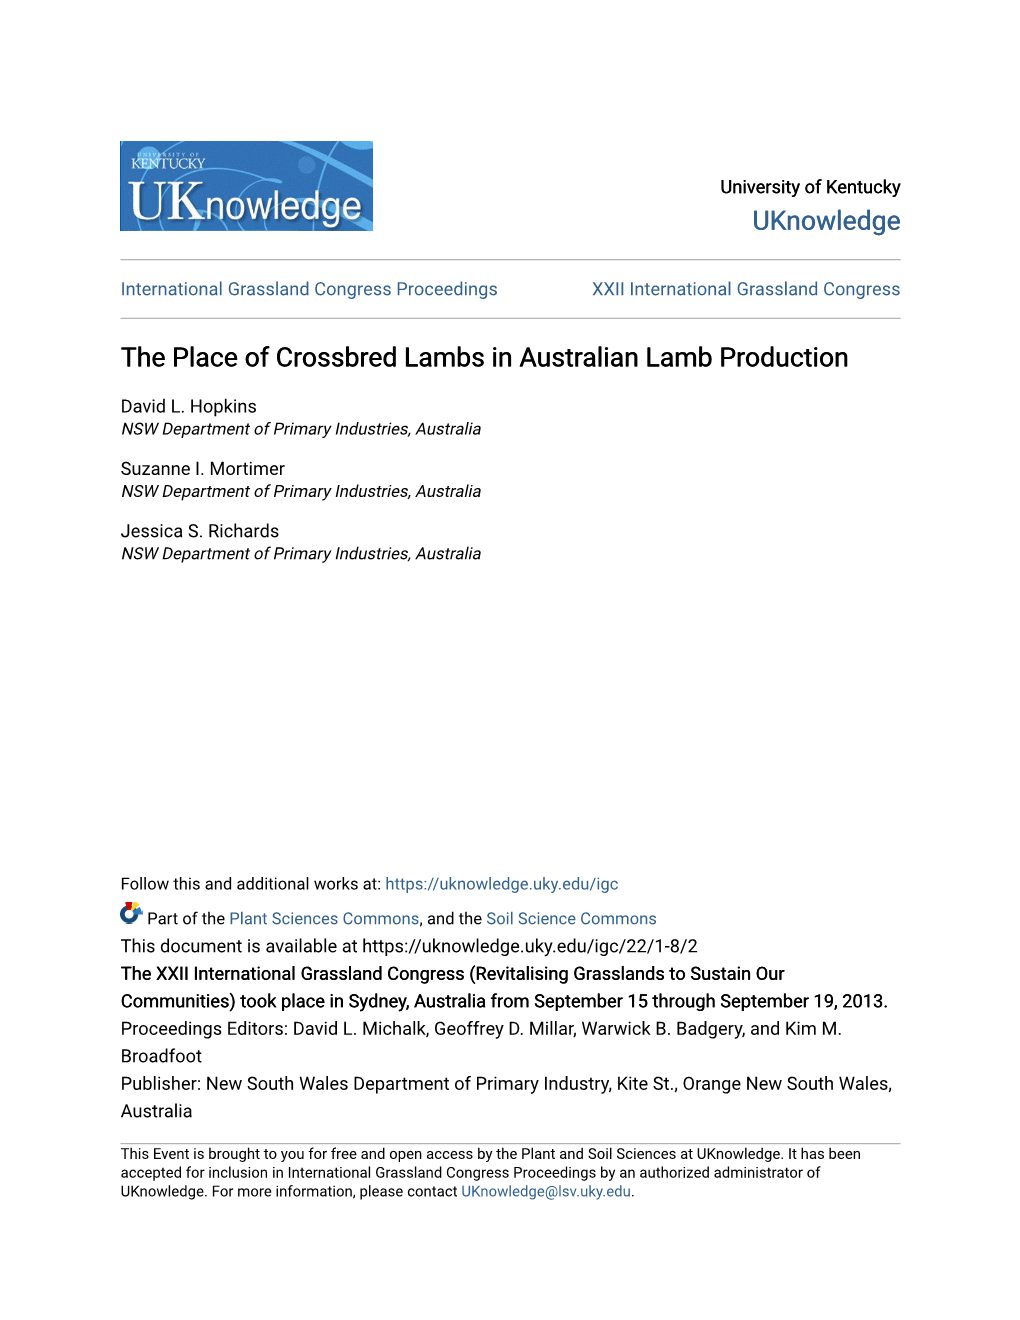 The Place of Crossbred Lambs in Australian Lamb Production